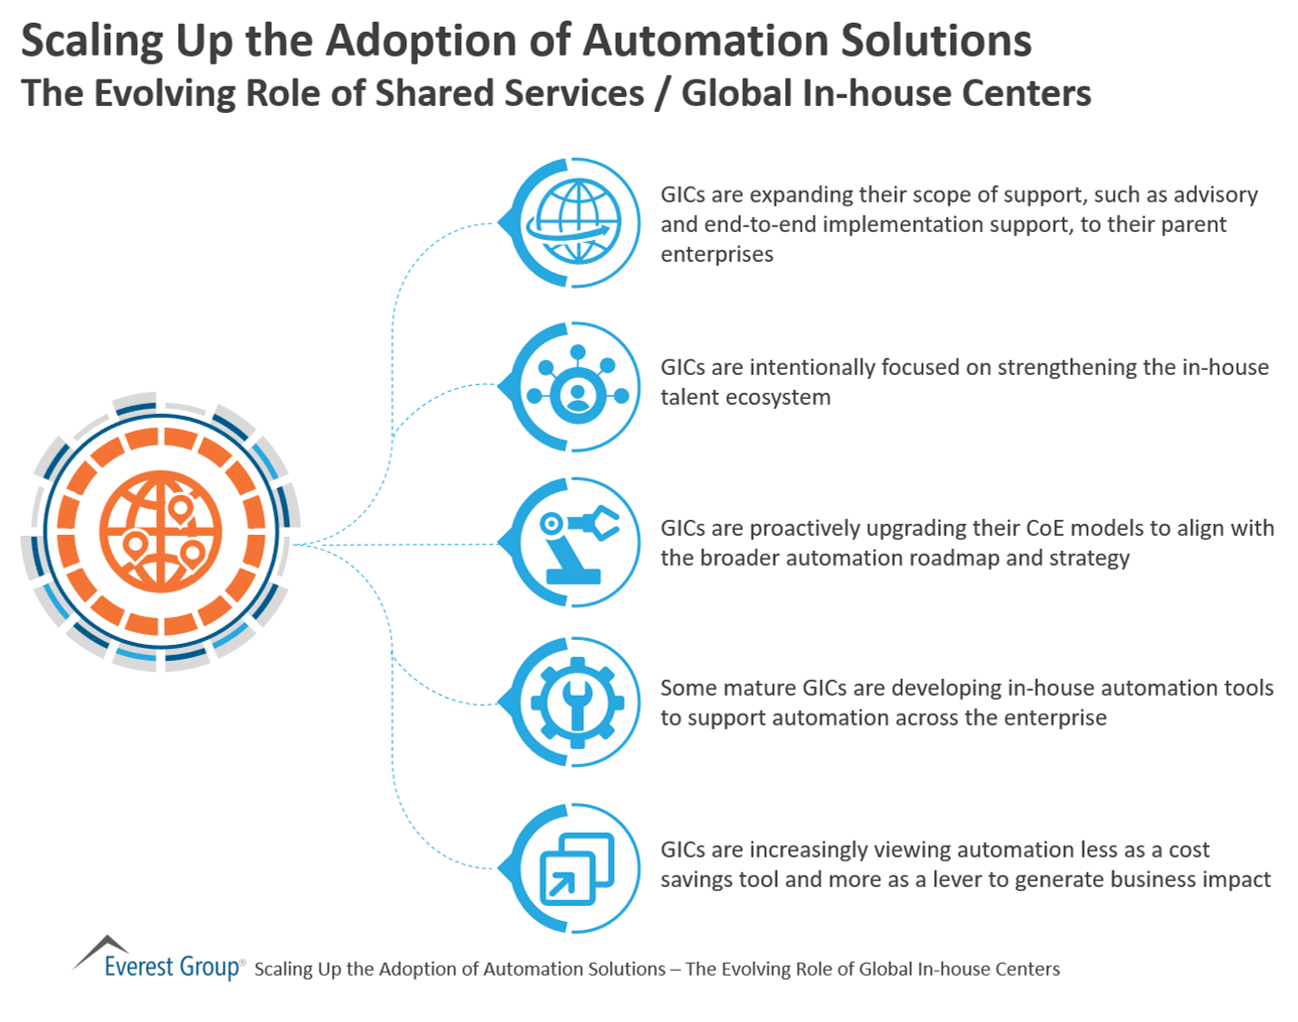 Scaling Up the Adoption of Automation Solutions GIC role